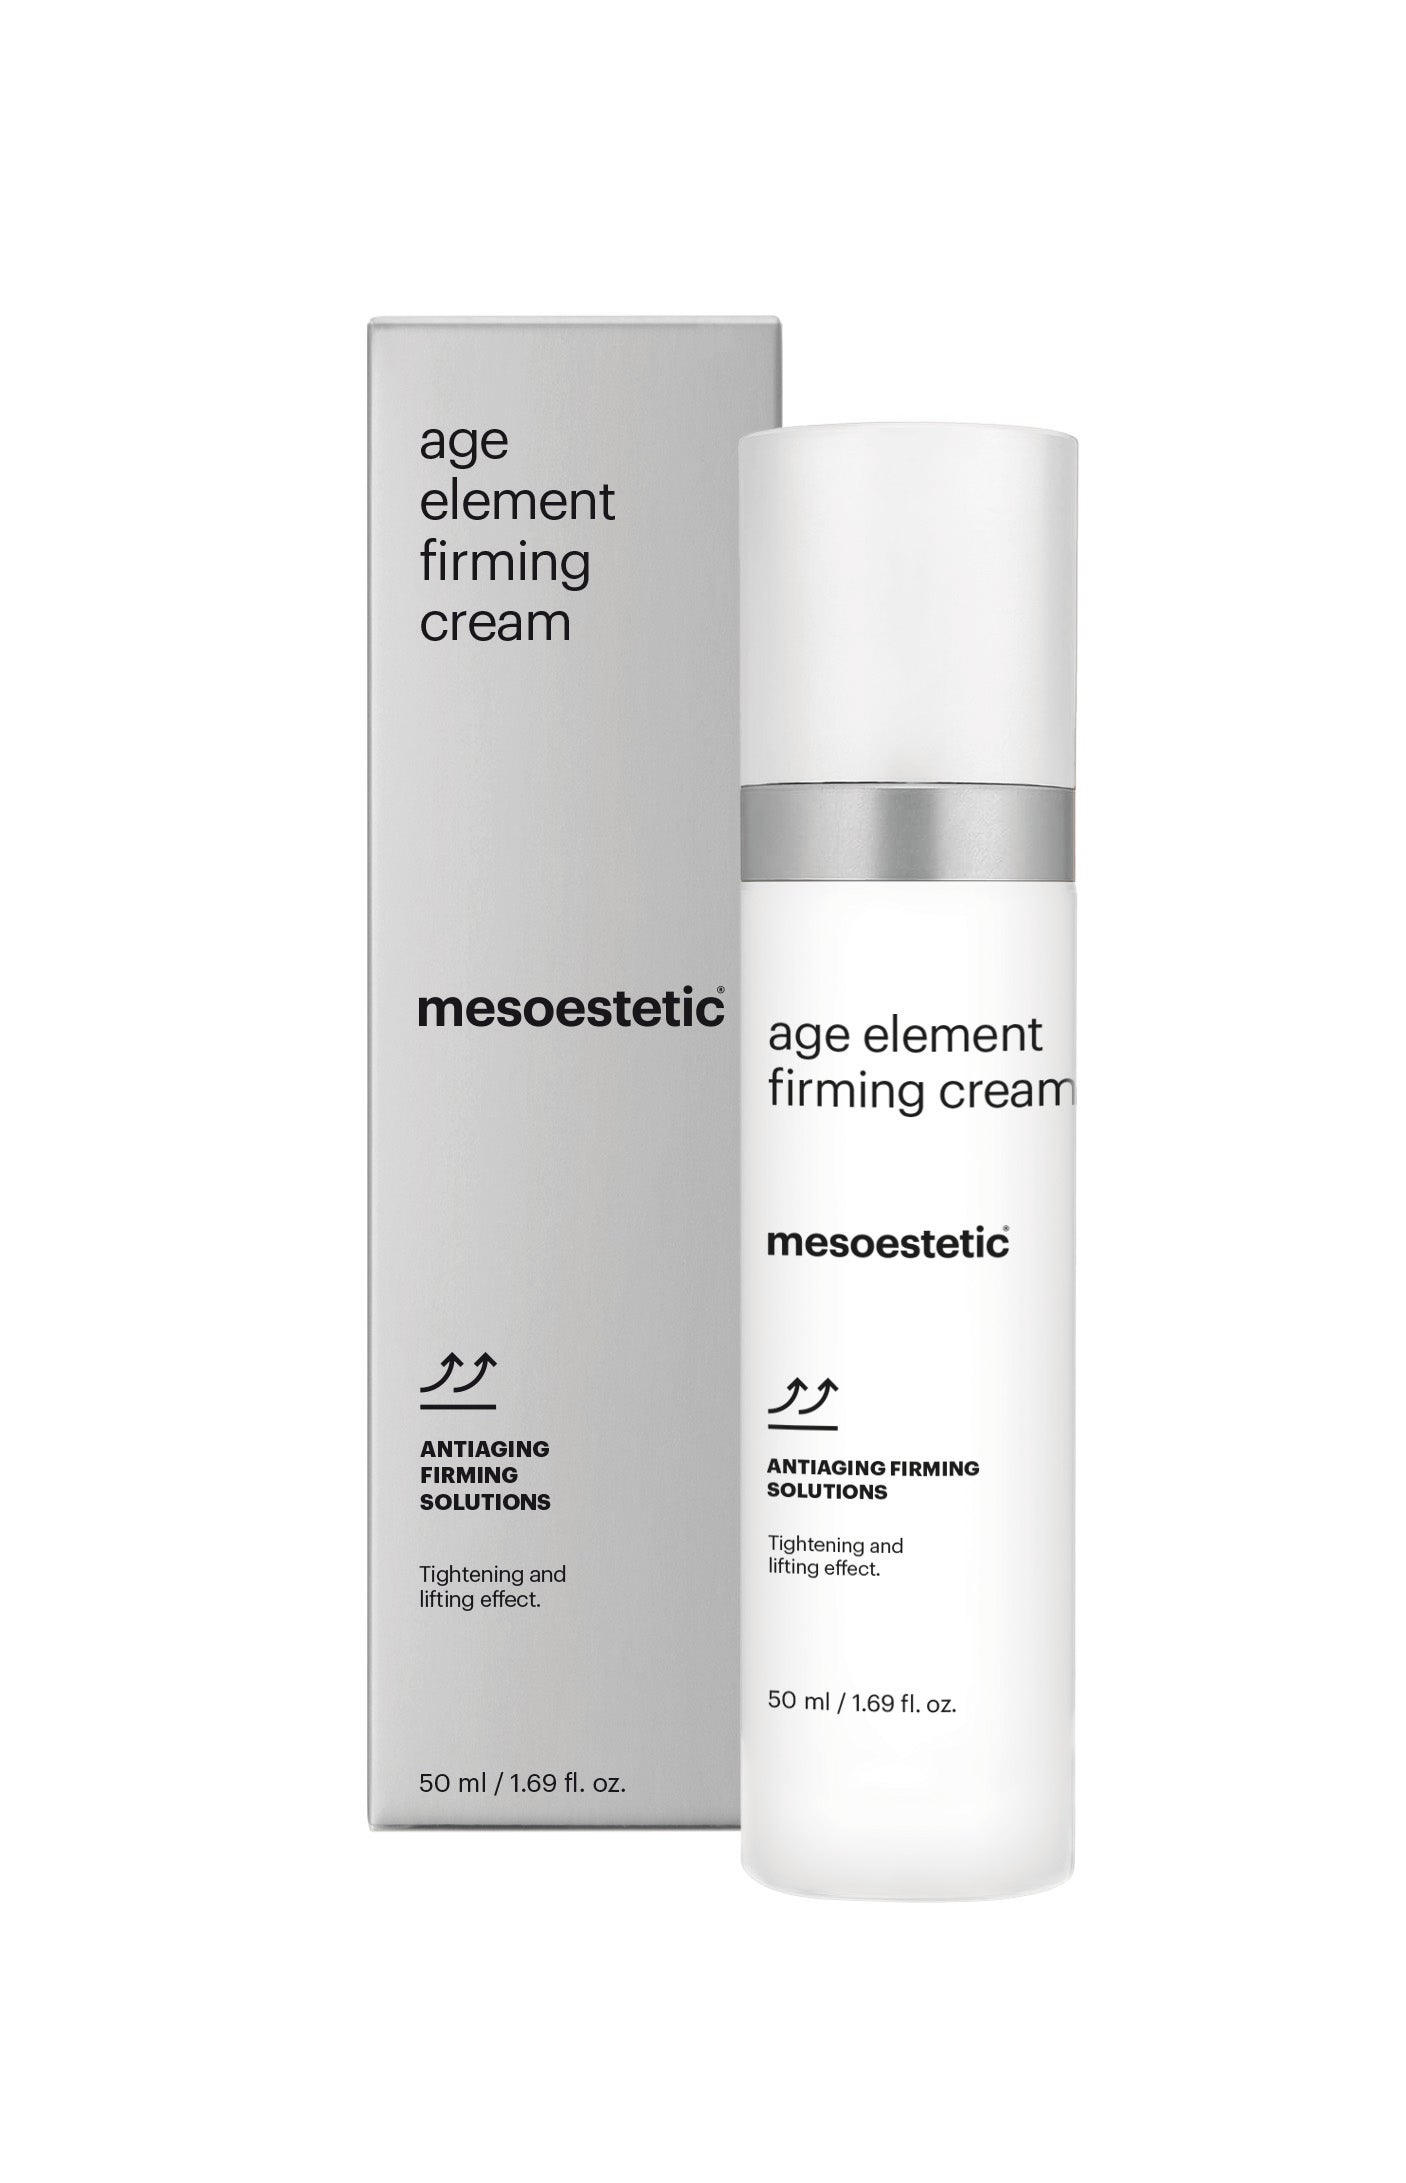 Mesoestetic age element firming cream